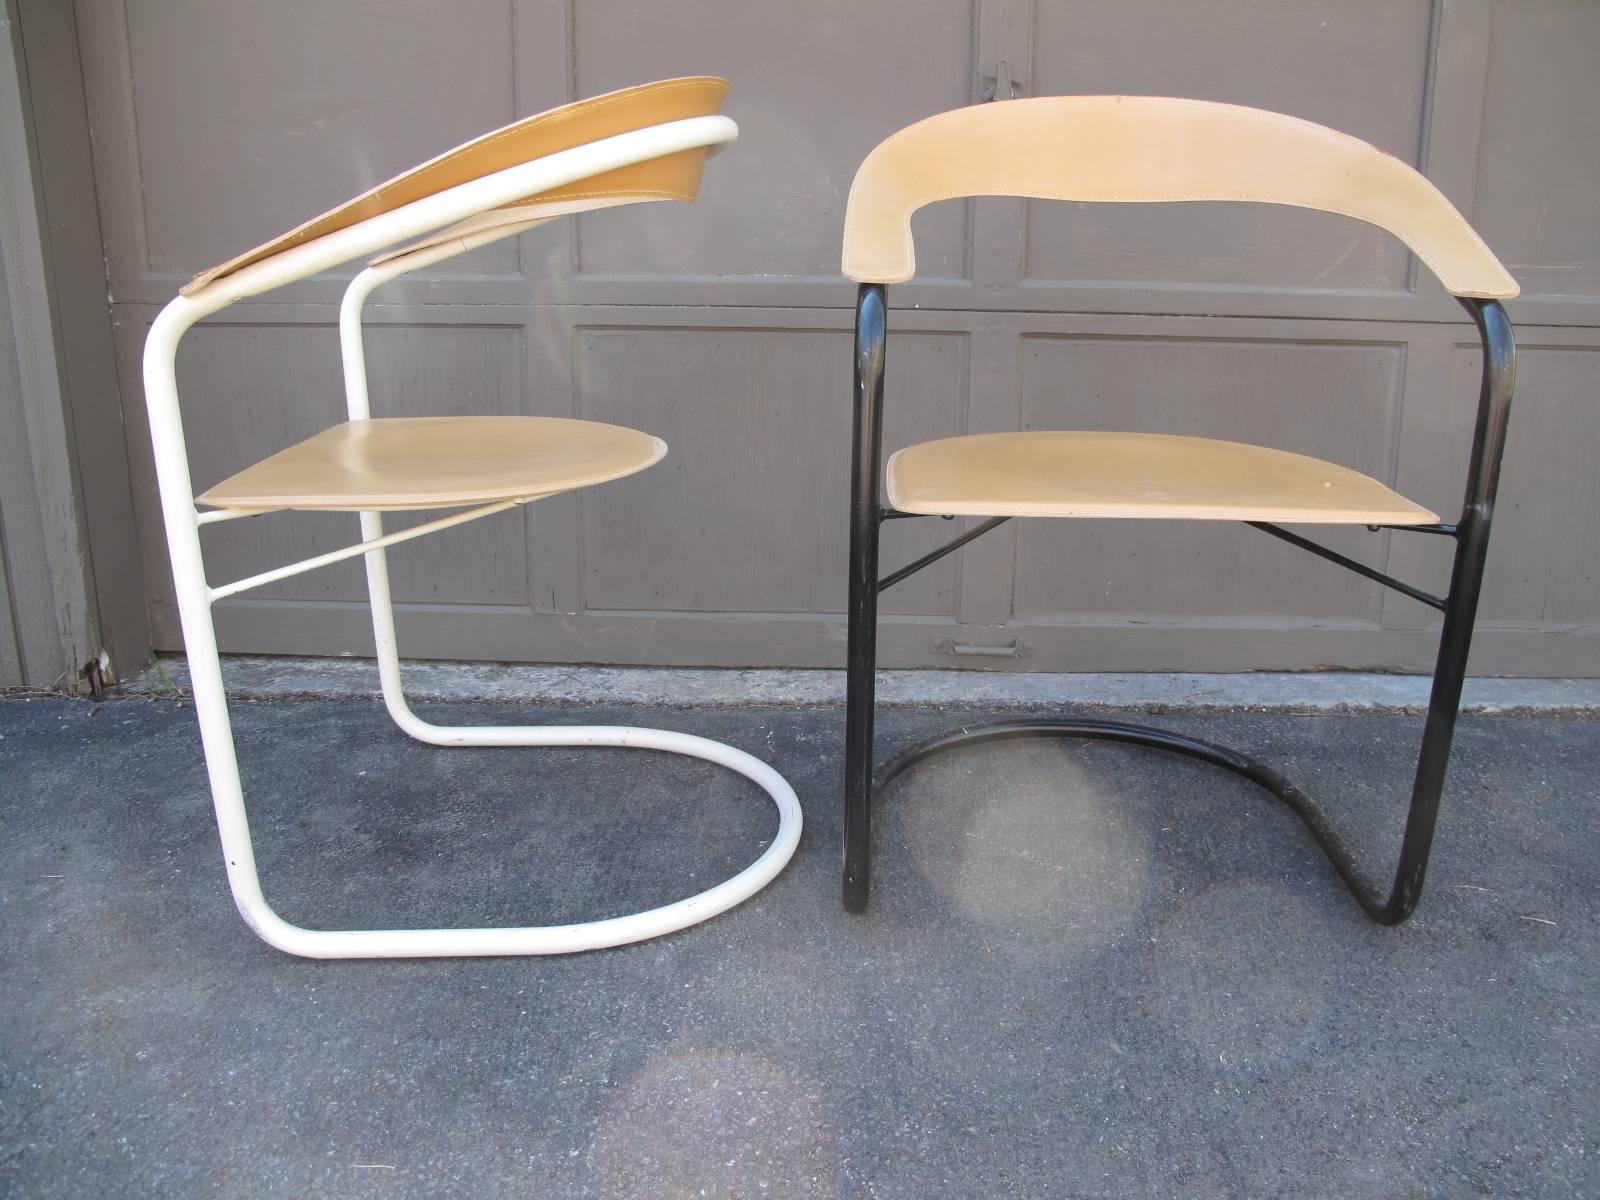 Two Modern Italian chairs. Tubular painted frames, one in black and one in white. Top-stitched leather seats and back. Marked 